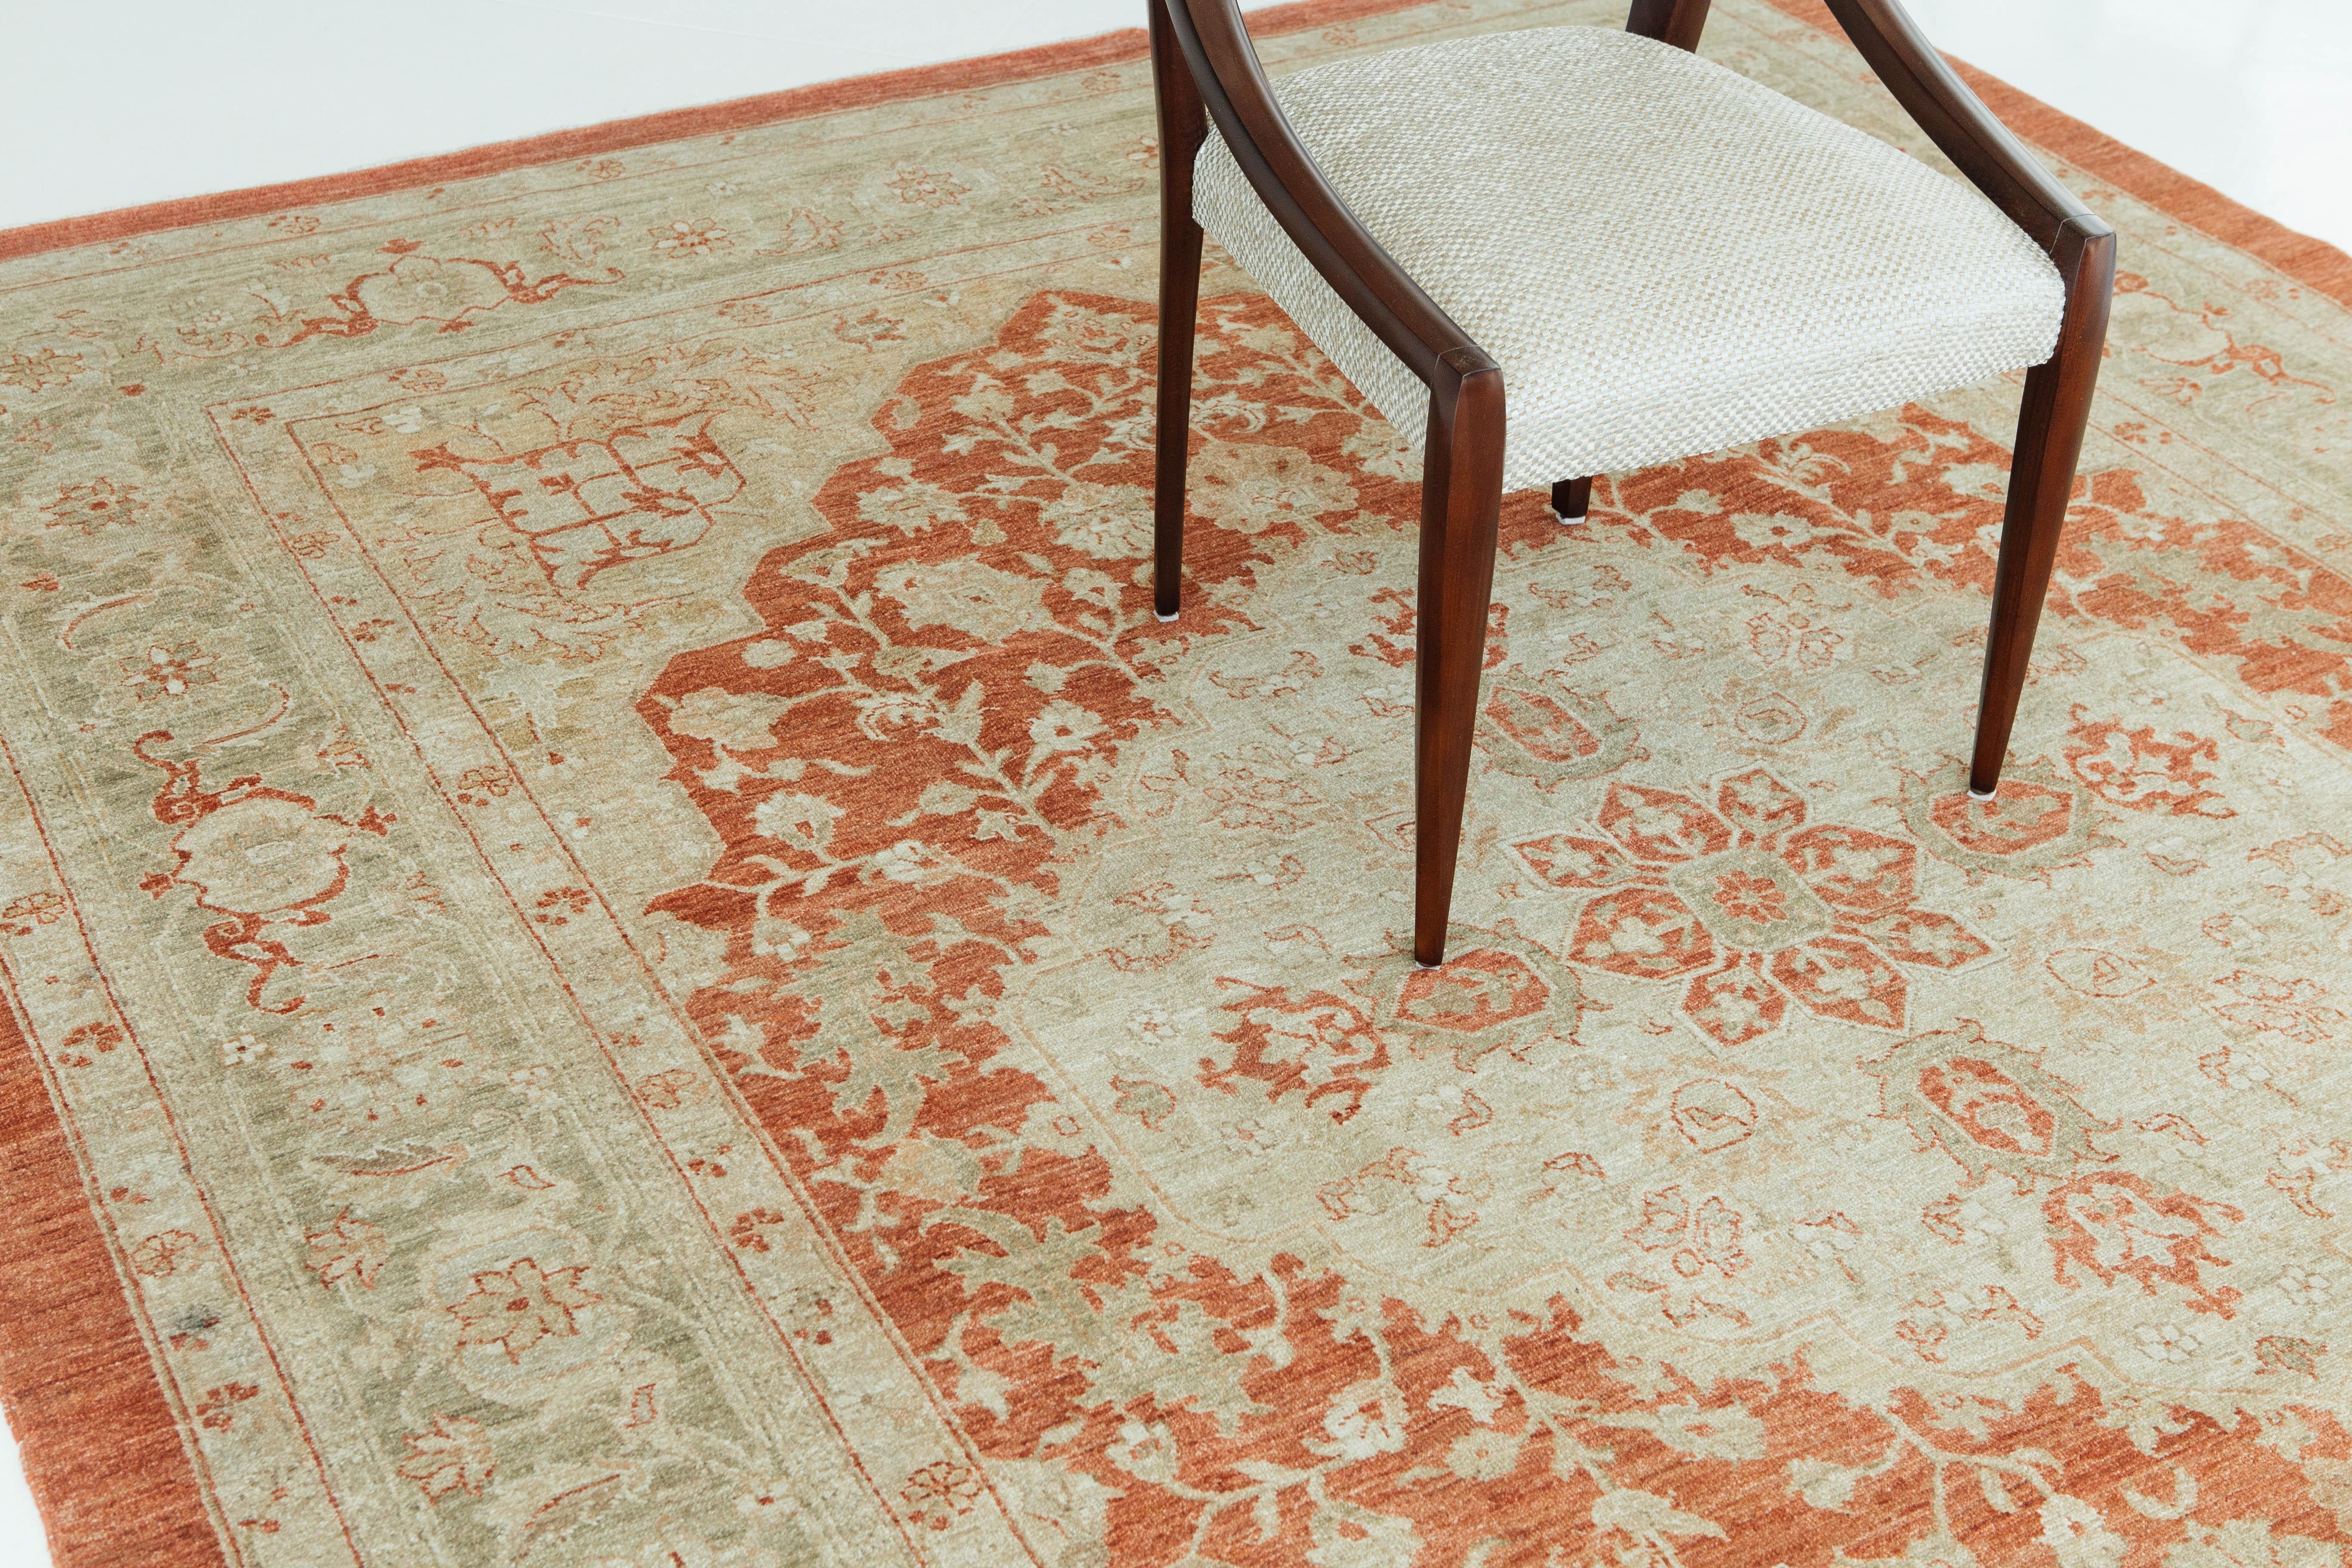 An exquisite vintage Serapi style recreation. This piece encompasses traditional Serapi motifs and weaves together beautiful tan and red-orange colors. Antique Serapis have historically been the favored rug of choice as seen in American state and